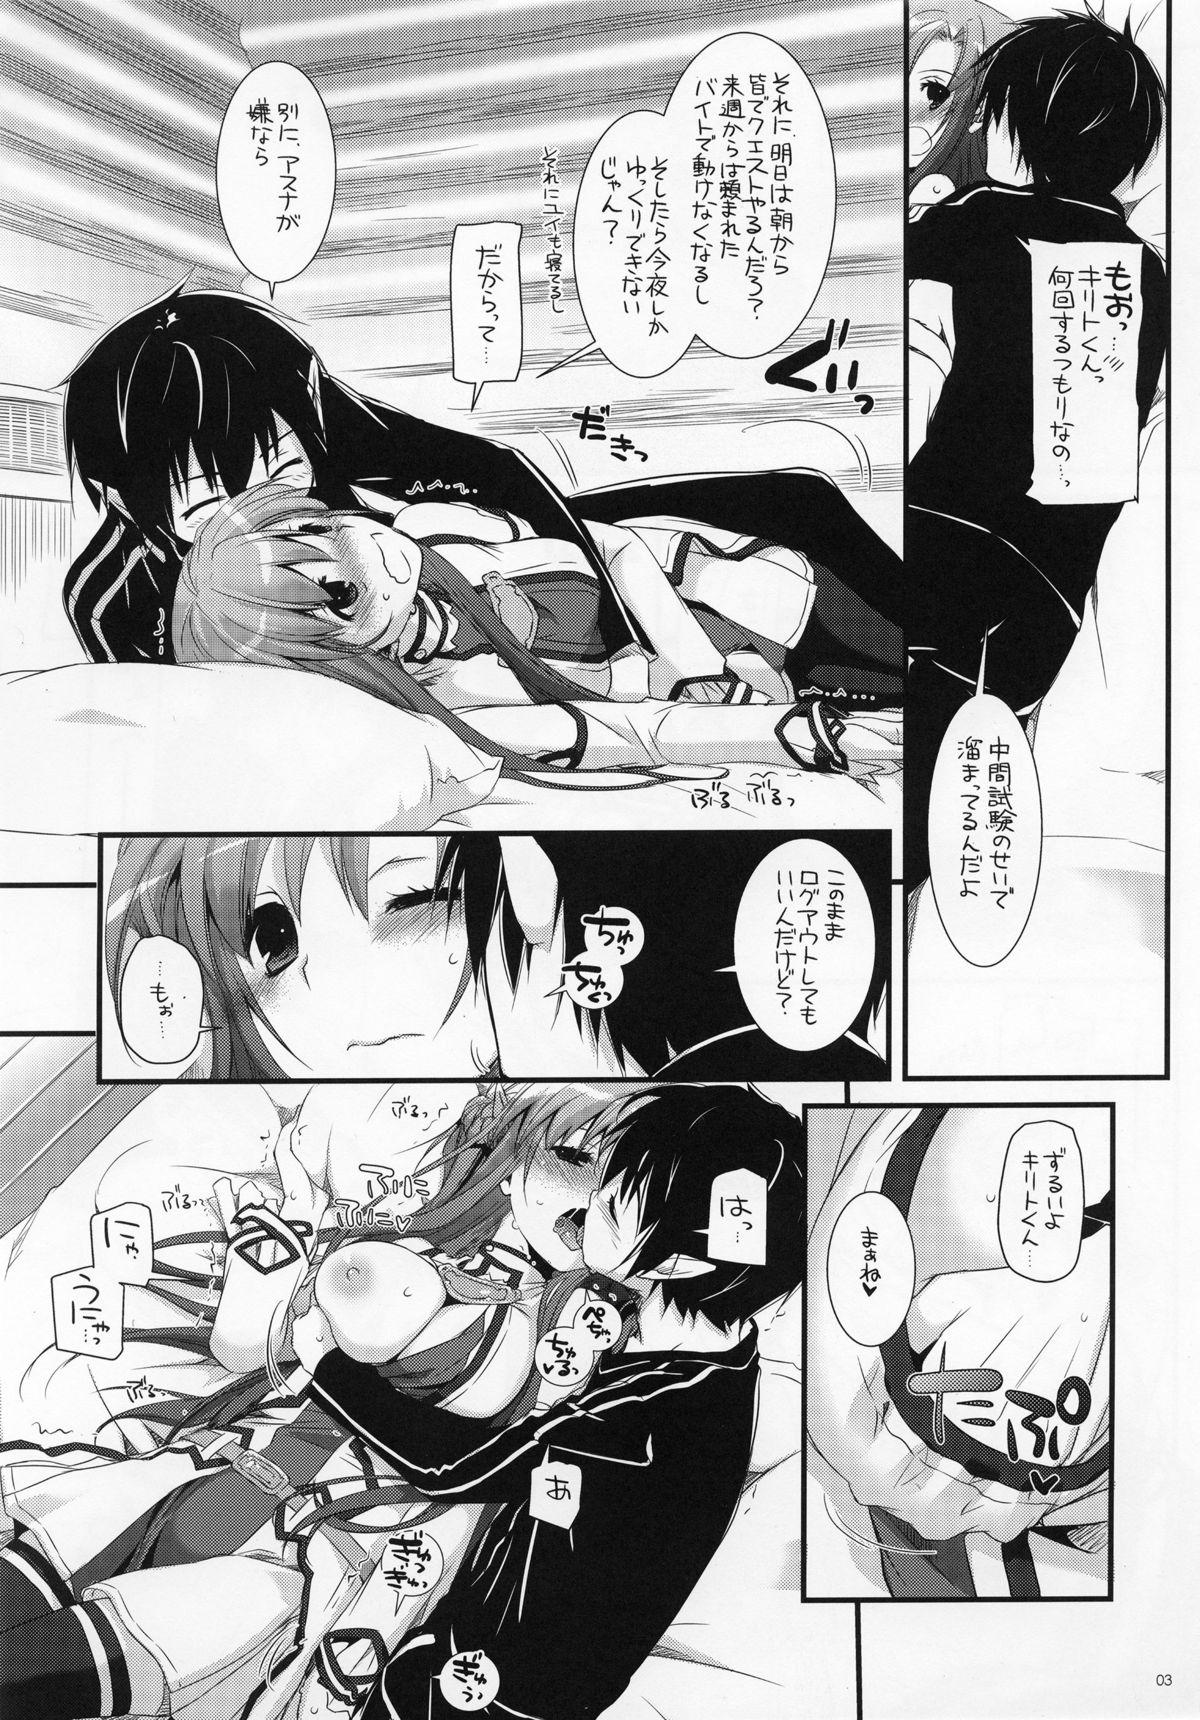 Doggy Style D.L. Action 72 - Sword art online Sensual - Page 2